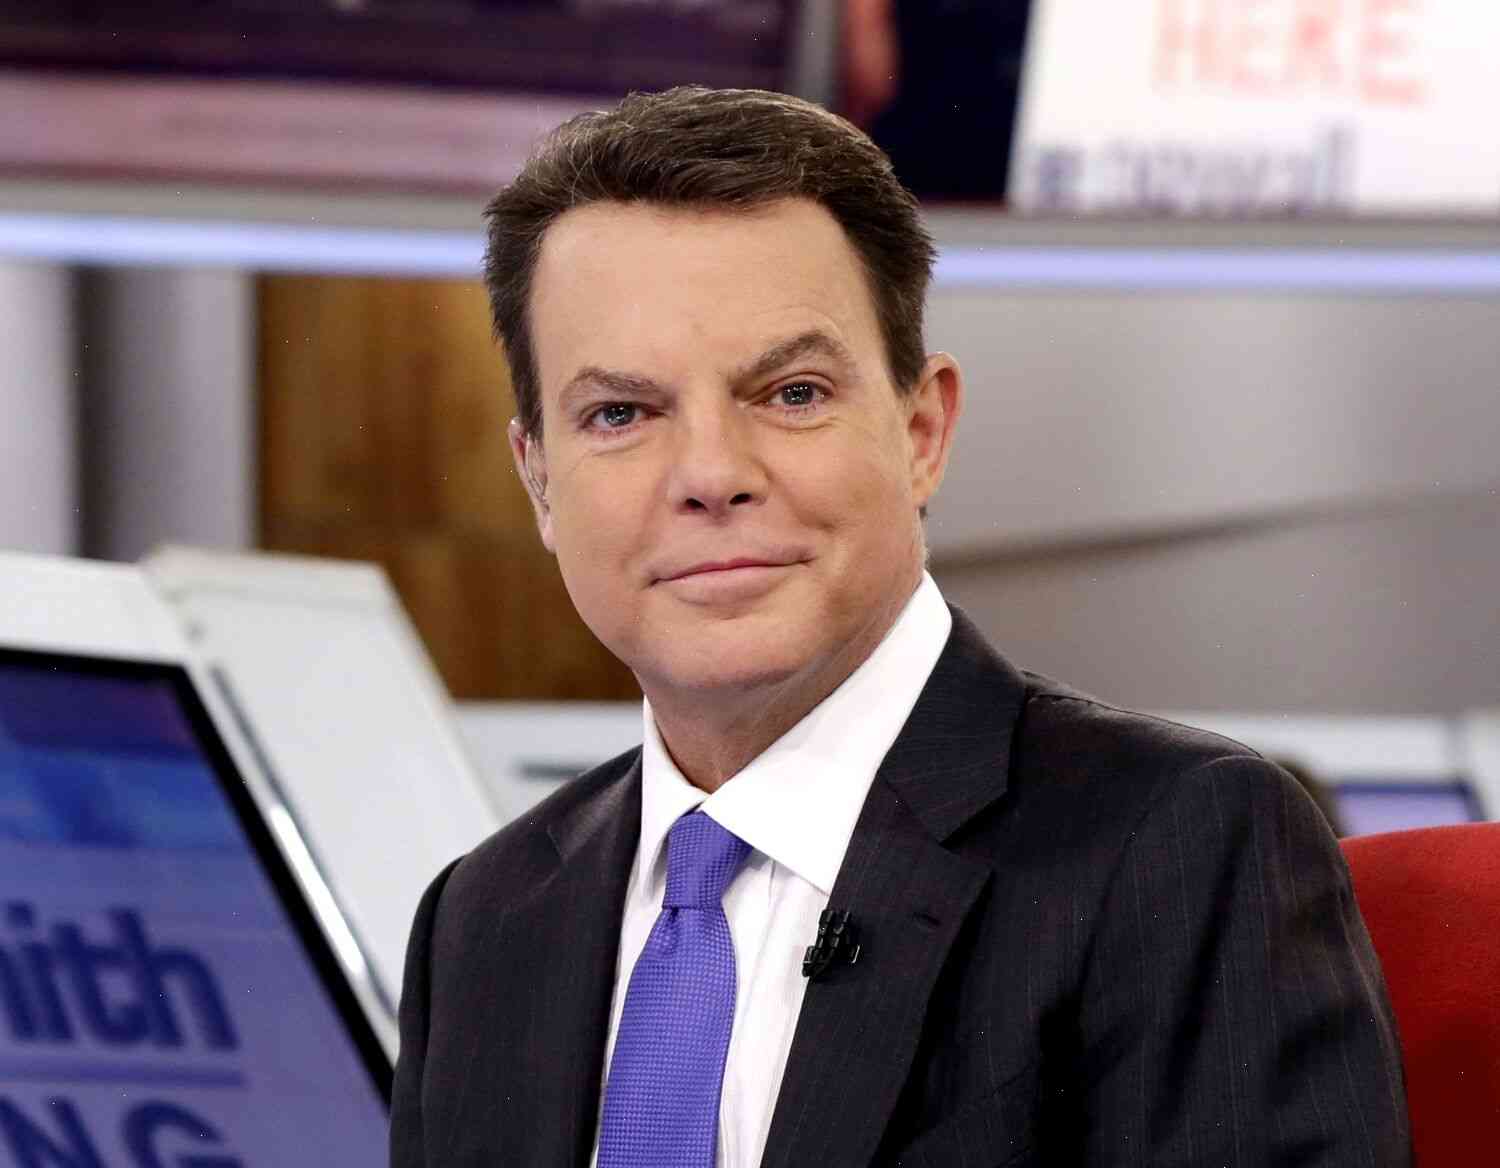 The News With Shepard Smith Will Be Discontinued